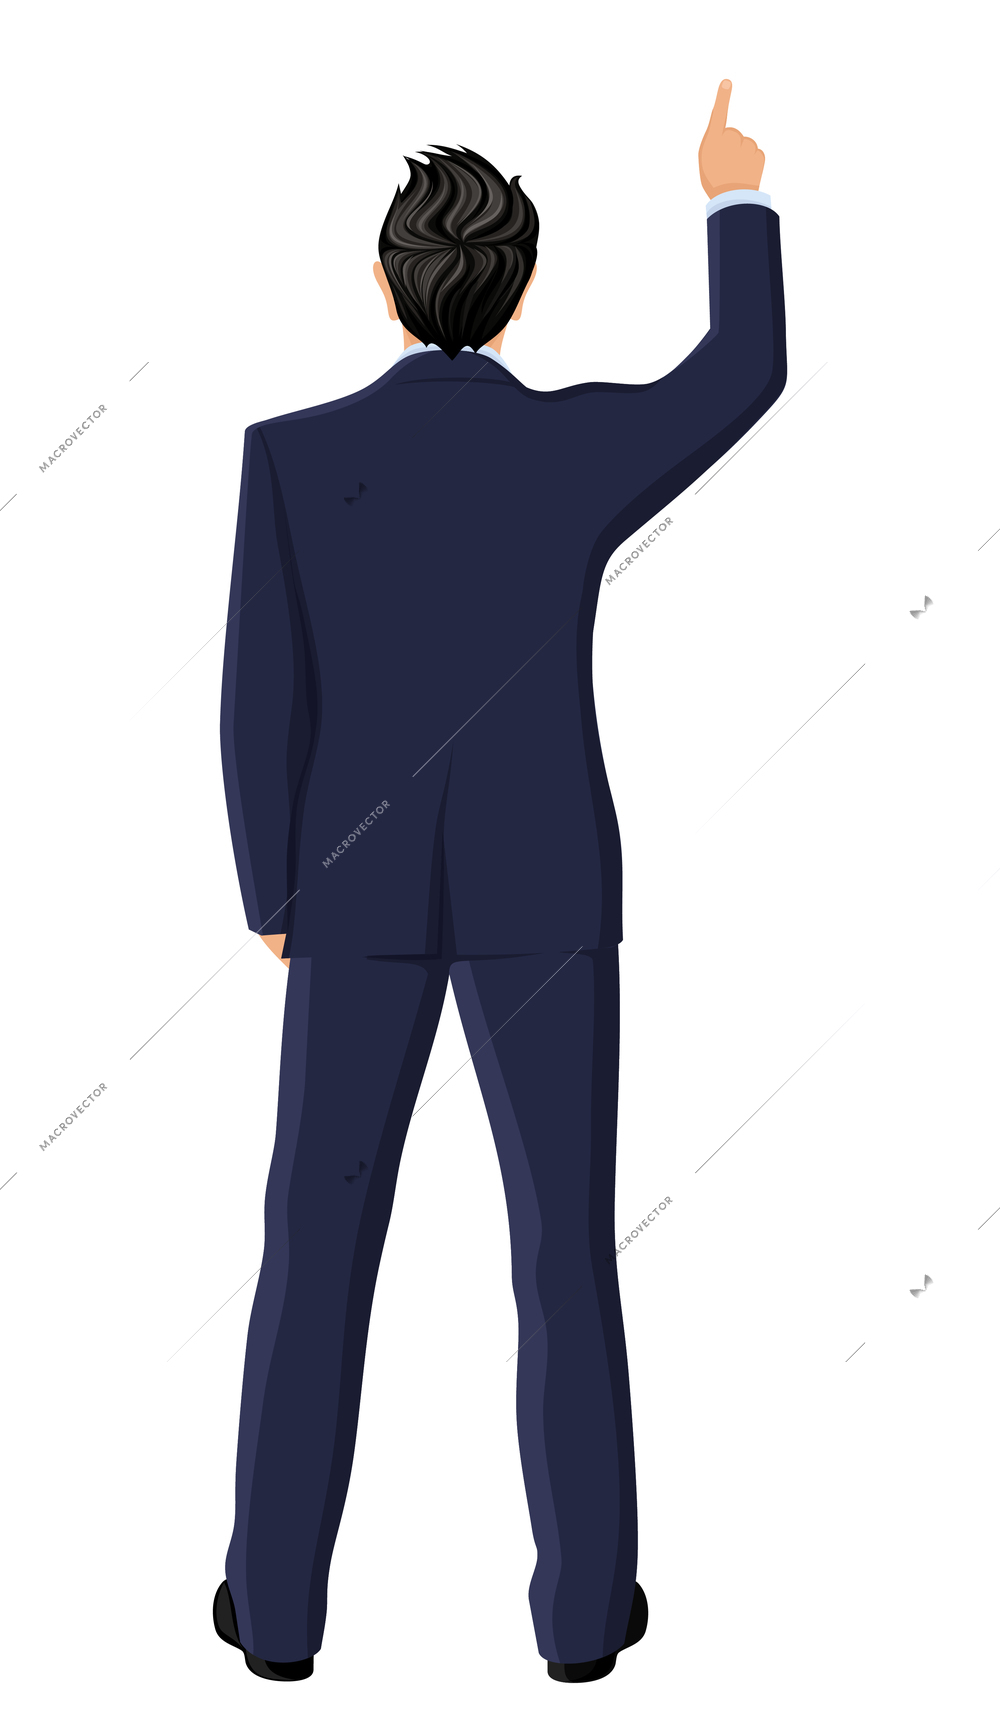 Businessman with right hand up full length back view isolated on white background vector illustration